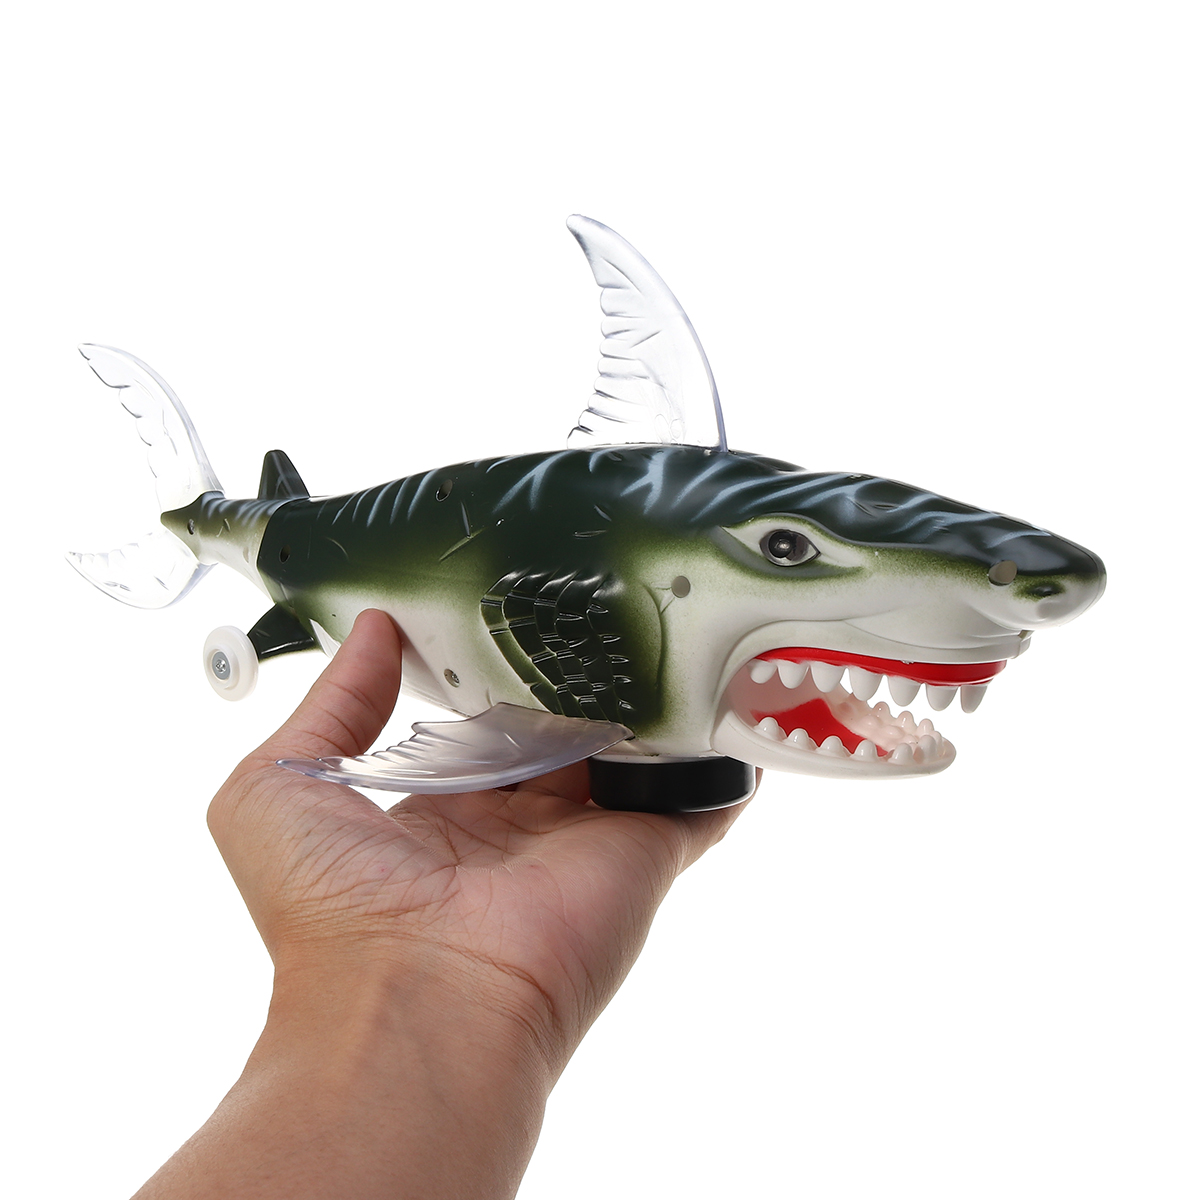 Electric-Projection-Light-Sound-Shark-Walking-Animal-Educational-Toys-for-Kids-Gift-1678213-9